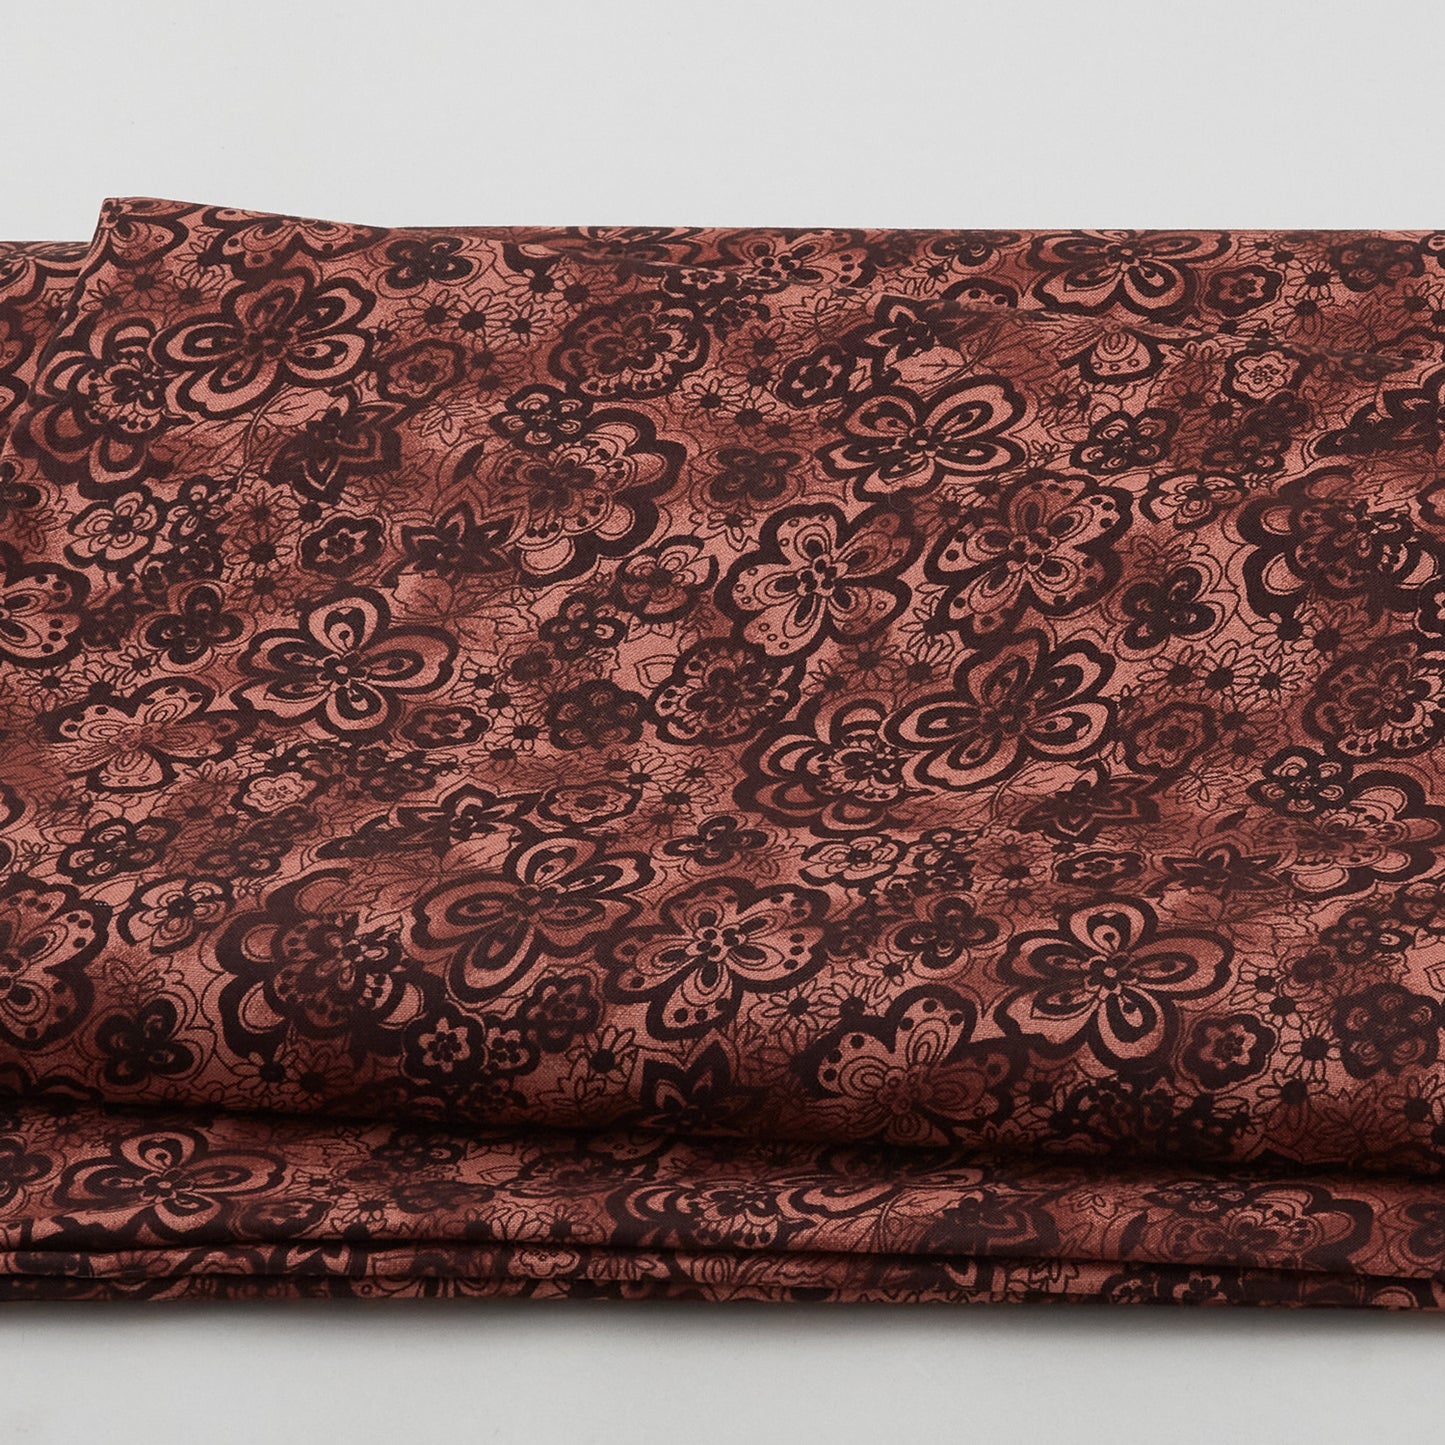 Isadora - Tonal Floral Chocolate 108" Wide 3 Yard Cut Primary Image